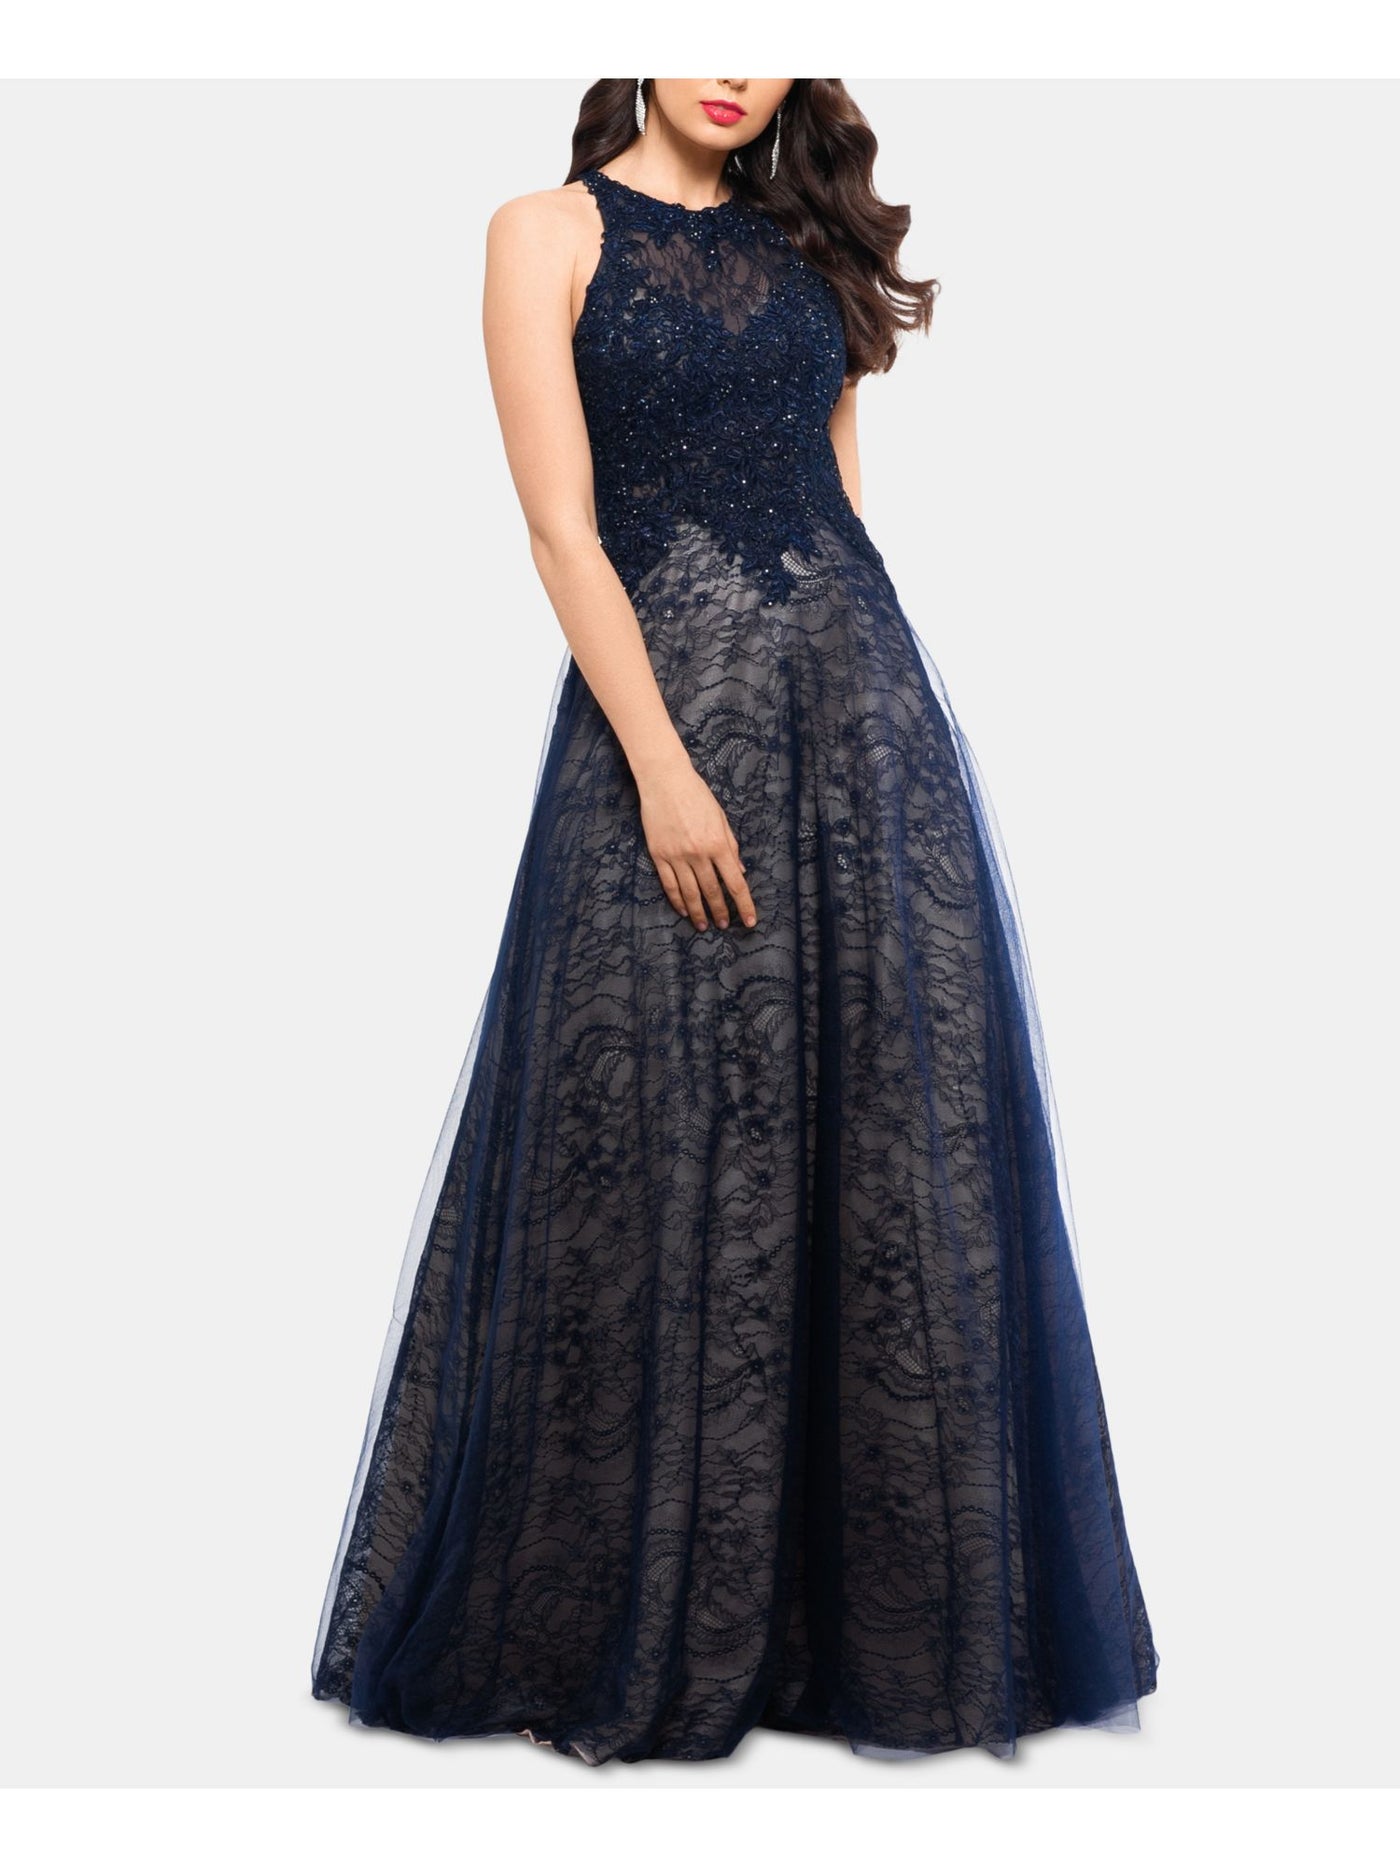 XSCAPE Womens Navy Embellished Lace Floral Sleeveless Illusion Neckline Full-Length Formal Fit + Flare Dress 2